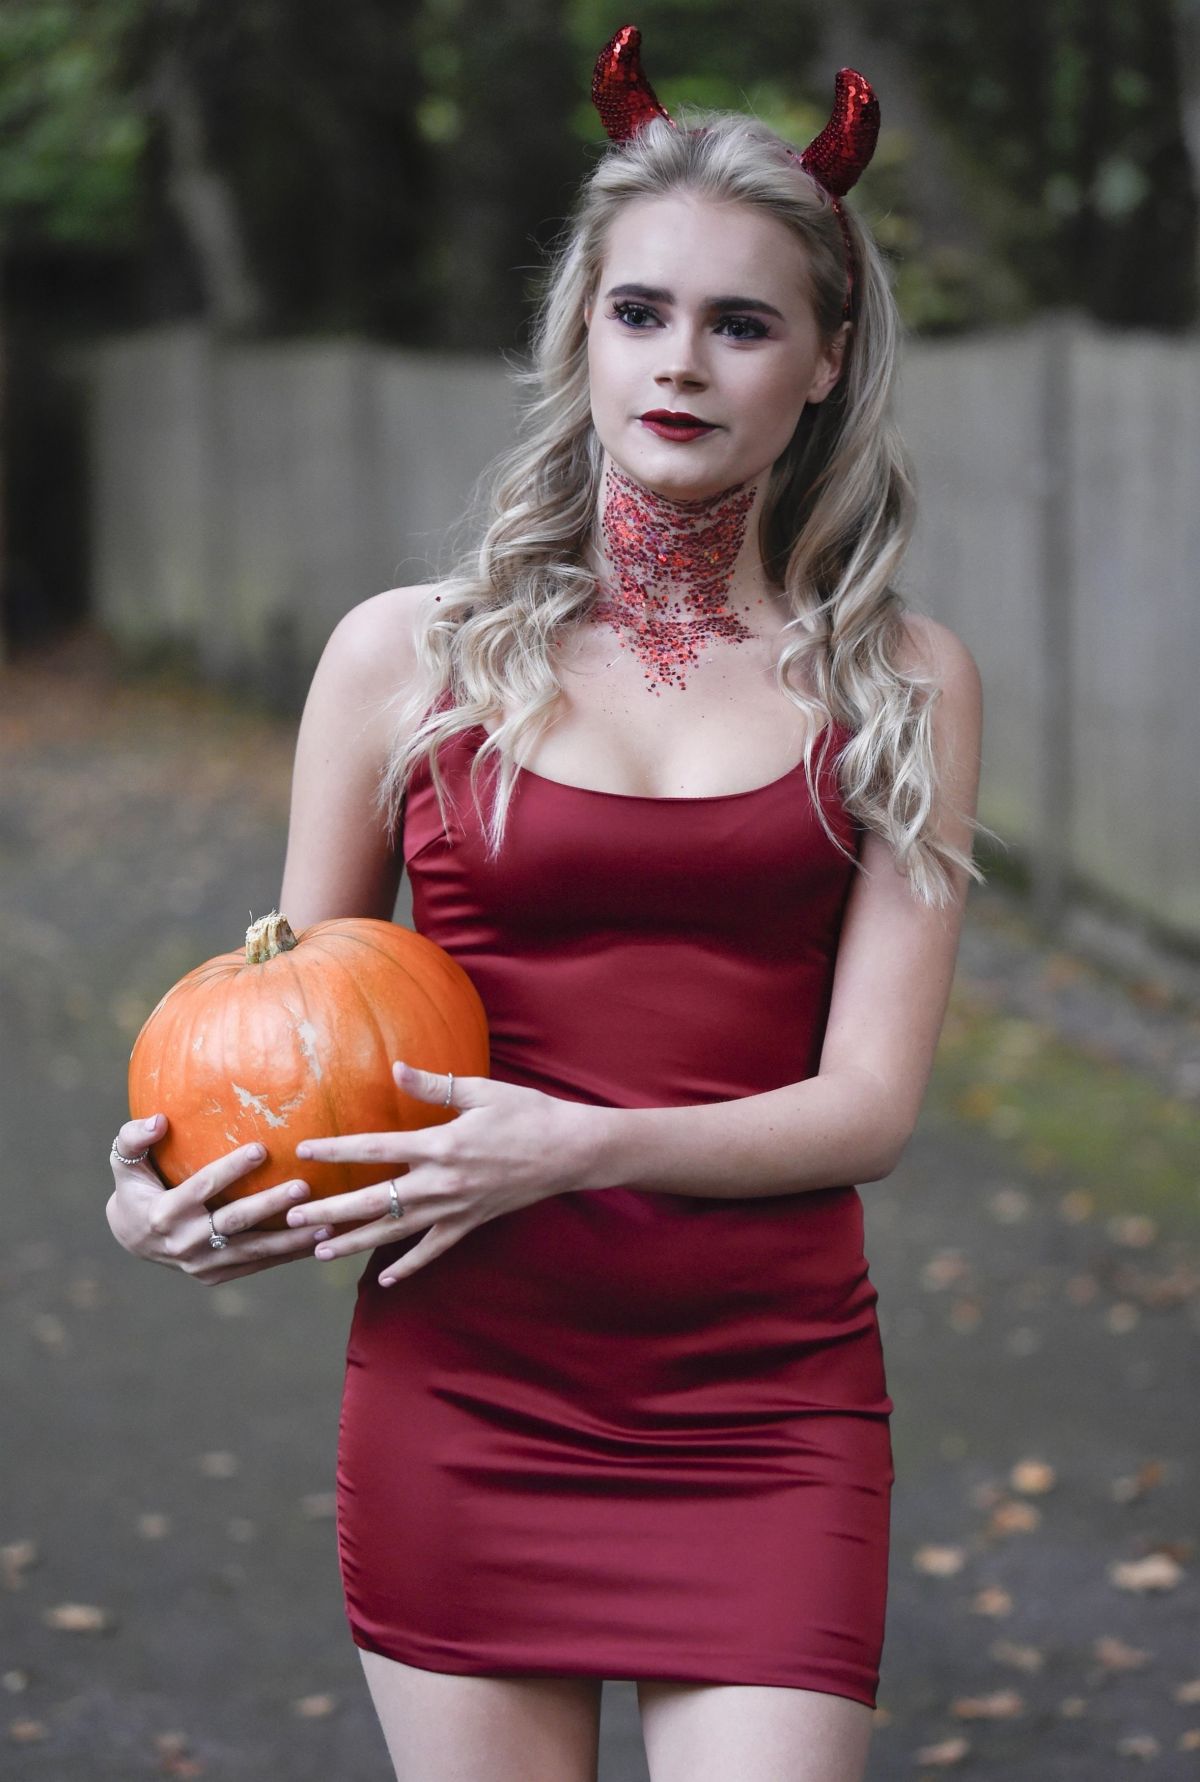 Lilly Sue Mcfadden Heading To A Halloween Party In Alderley Edge 10 28 2021 4 